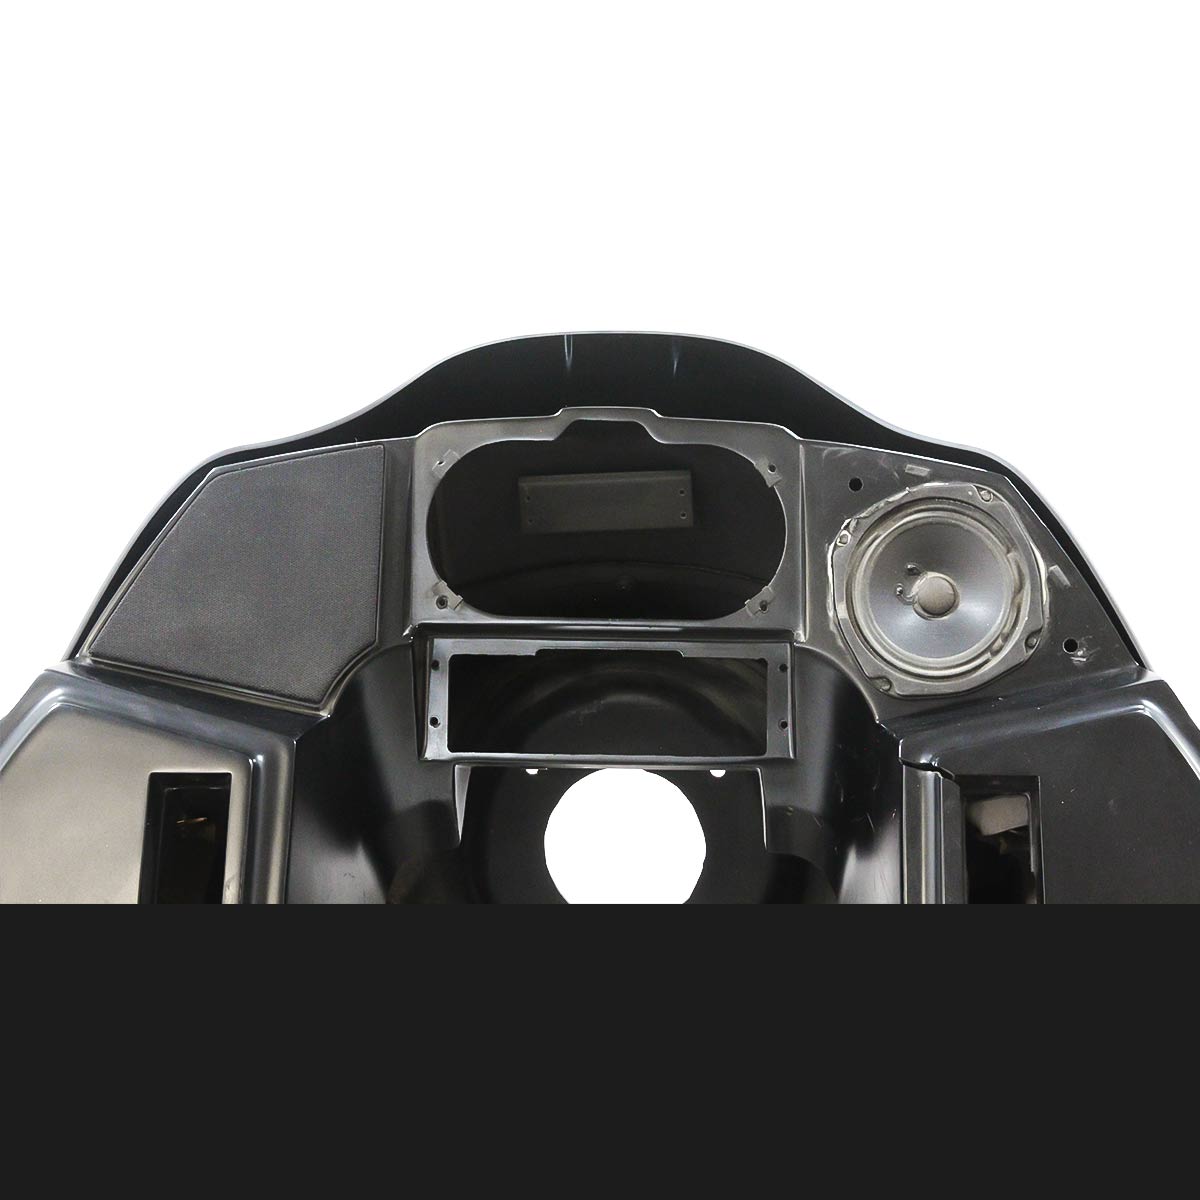 8" Solid Black Flare™ Windshield for Harley-Davidson motorcycles models with FXRP, FXRT, FXRD Style Fairings